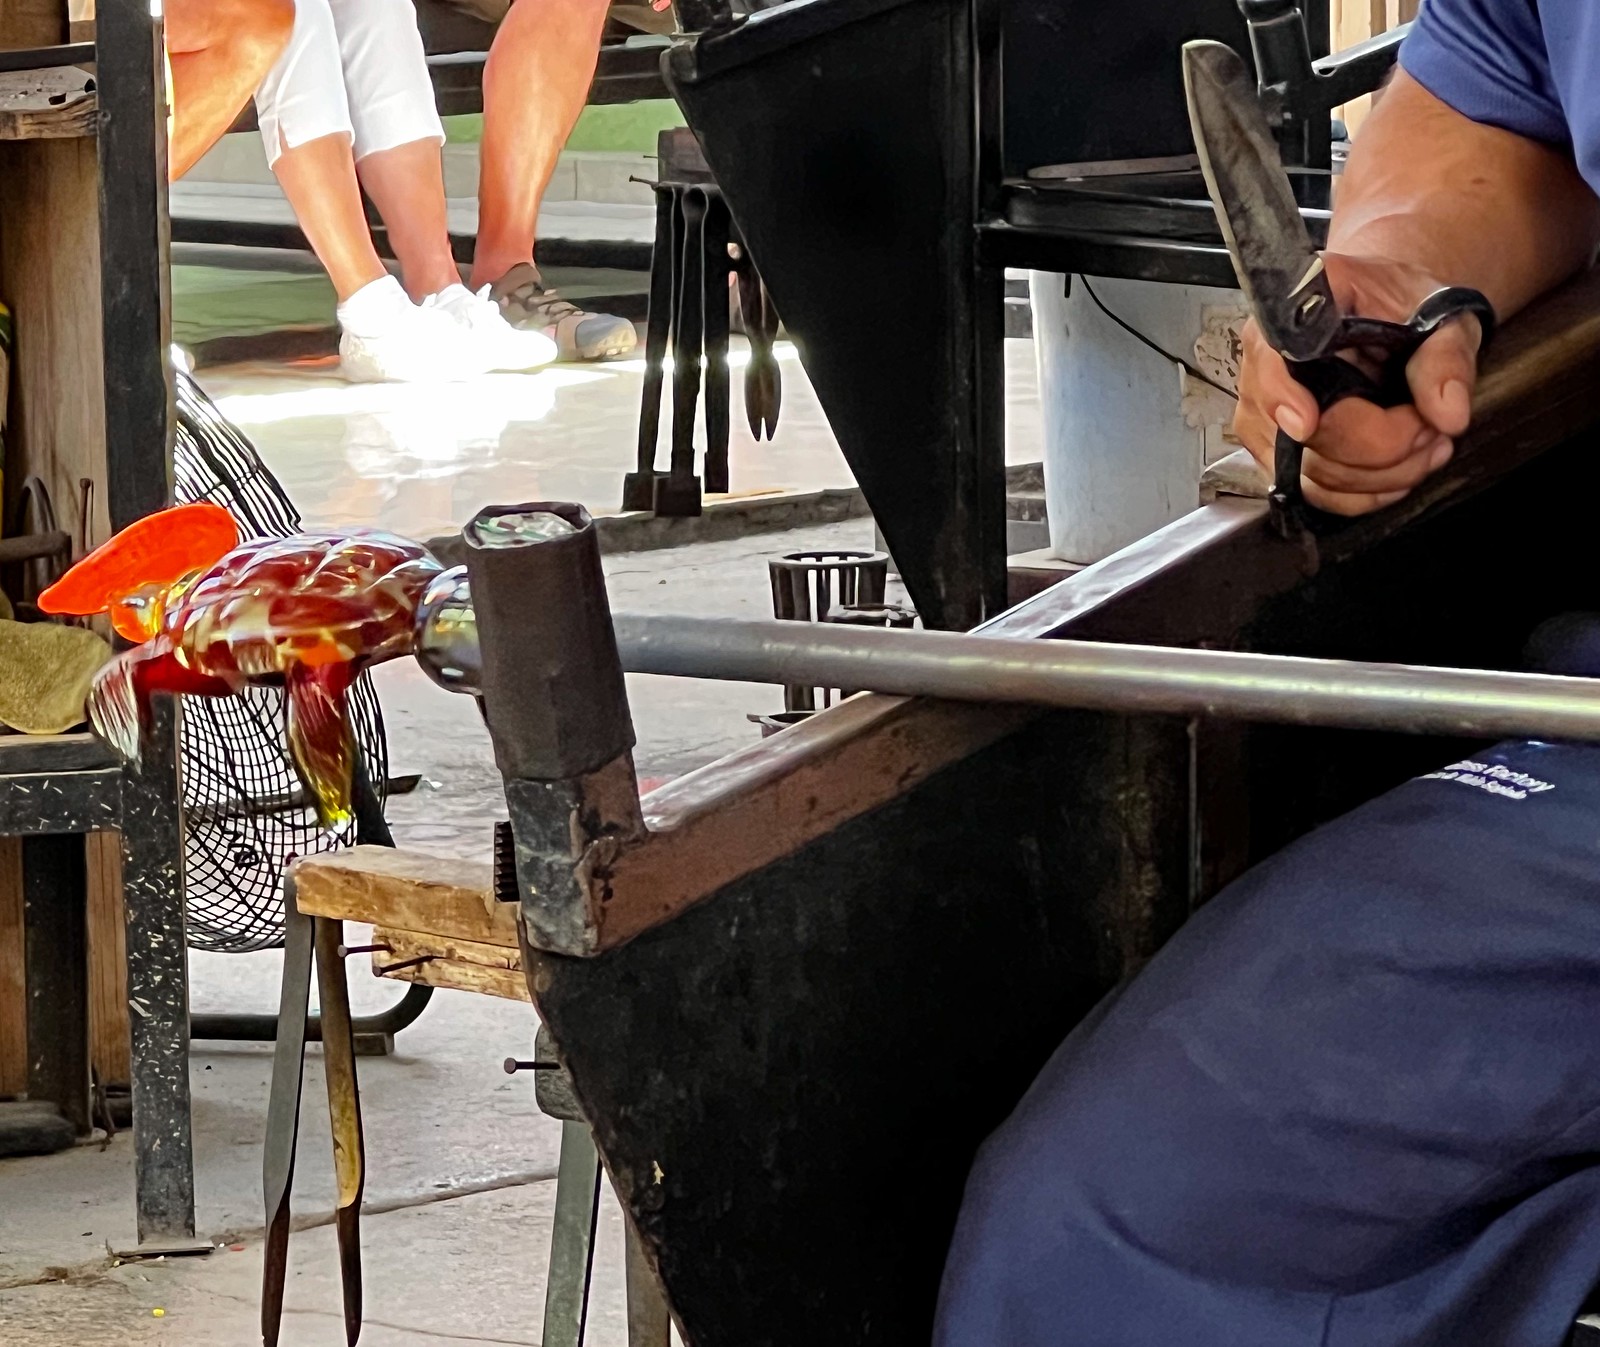 Mexican craftsmen forming molten glass